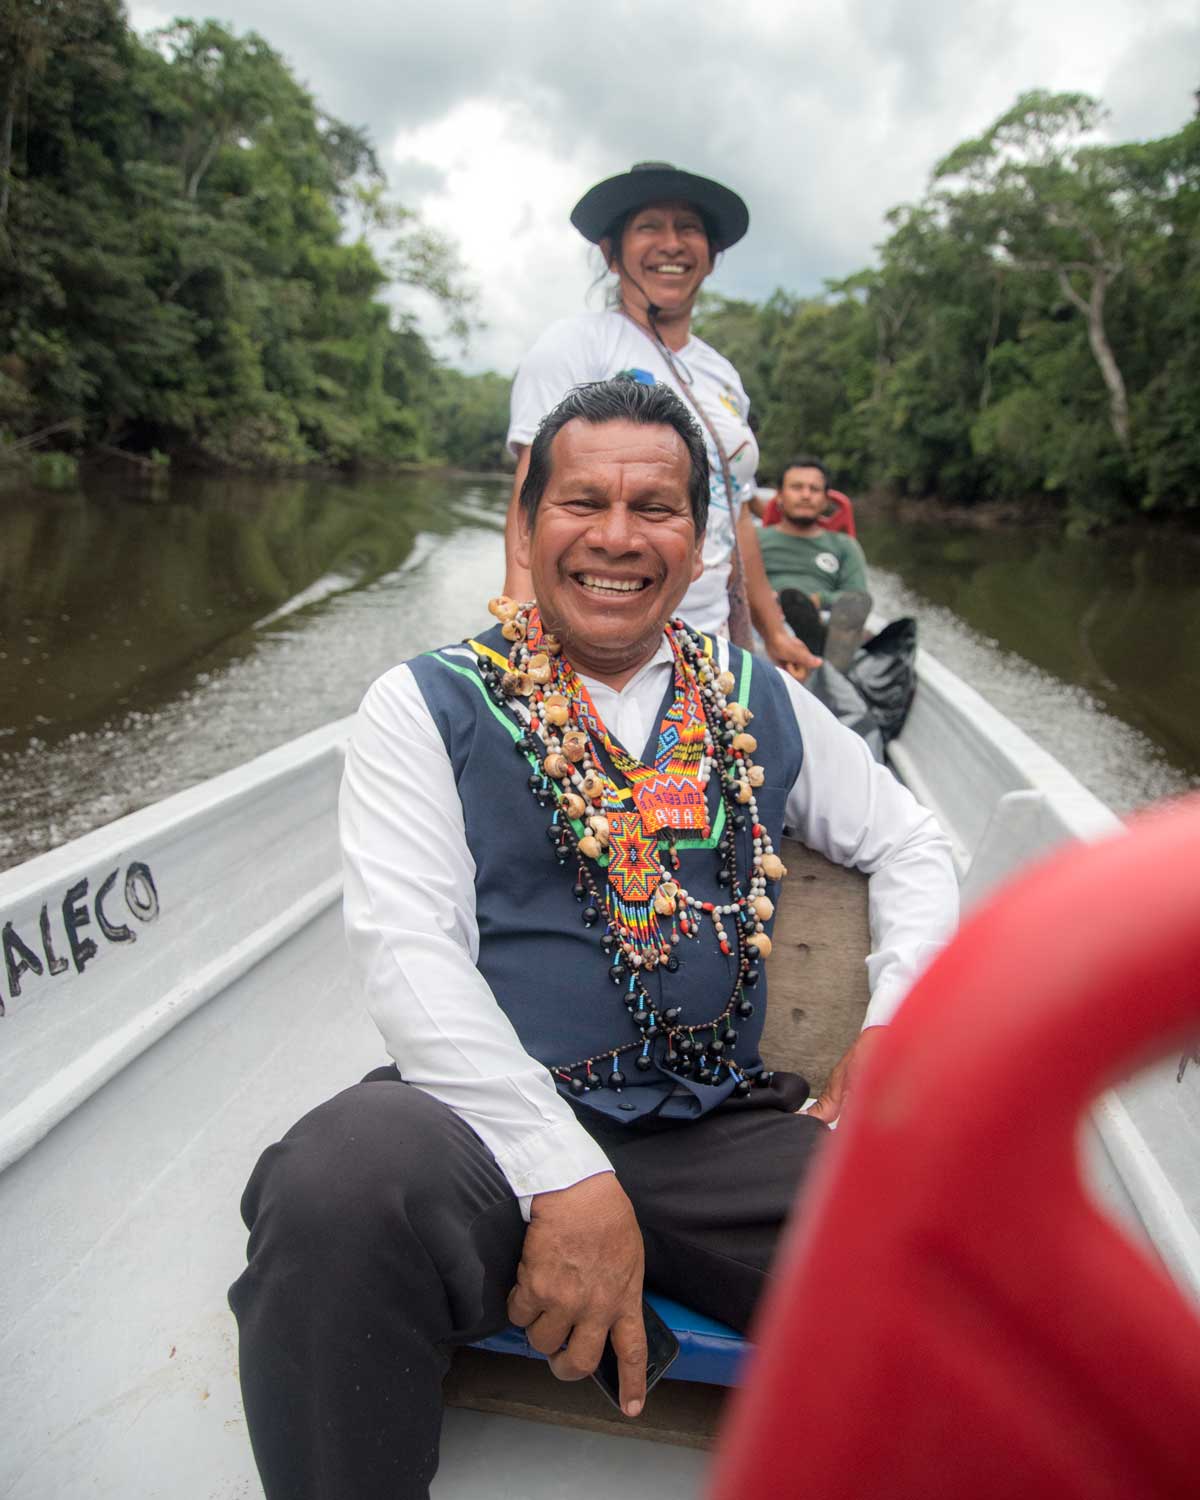 A Kichwa Shaman dressed in white shirt and blue vest wears necklaces and amulets while sitting in a motorized canoe